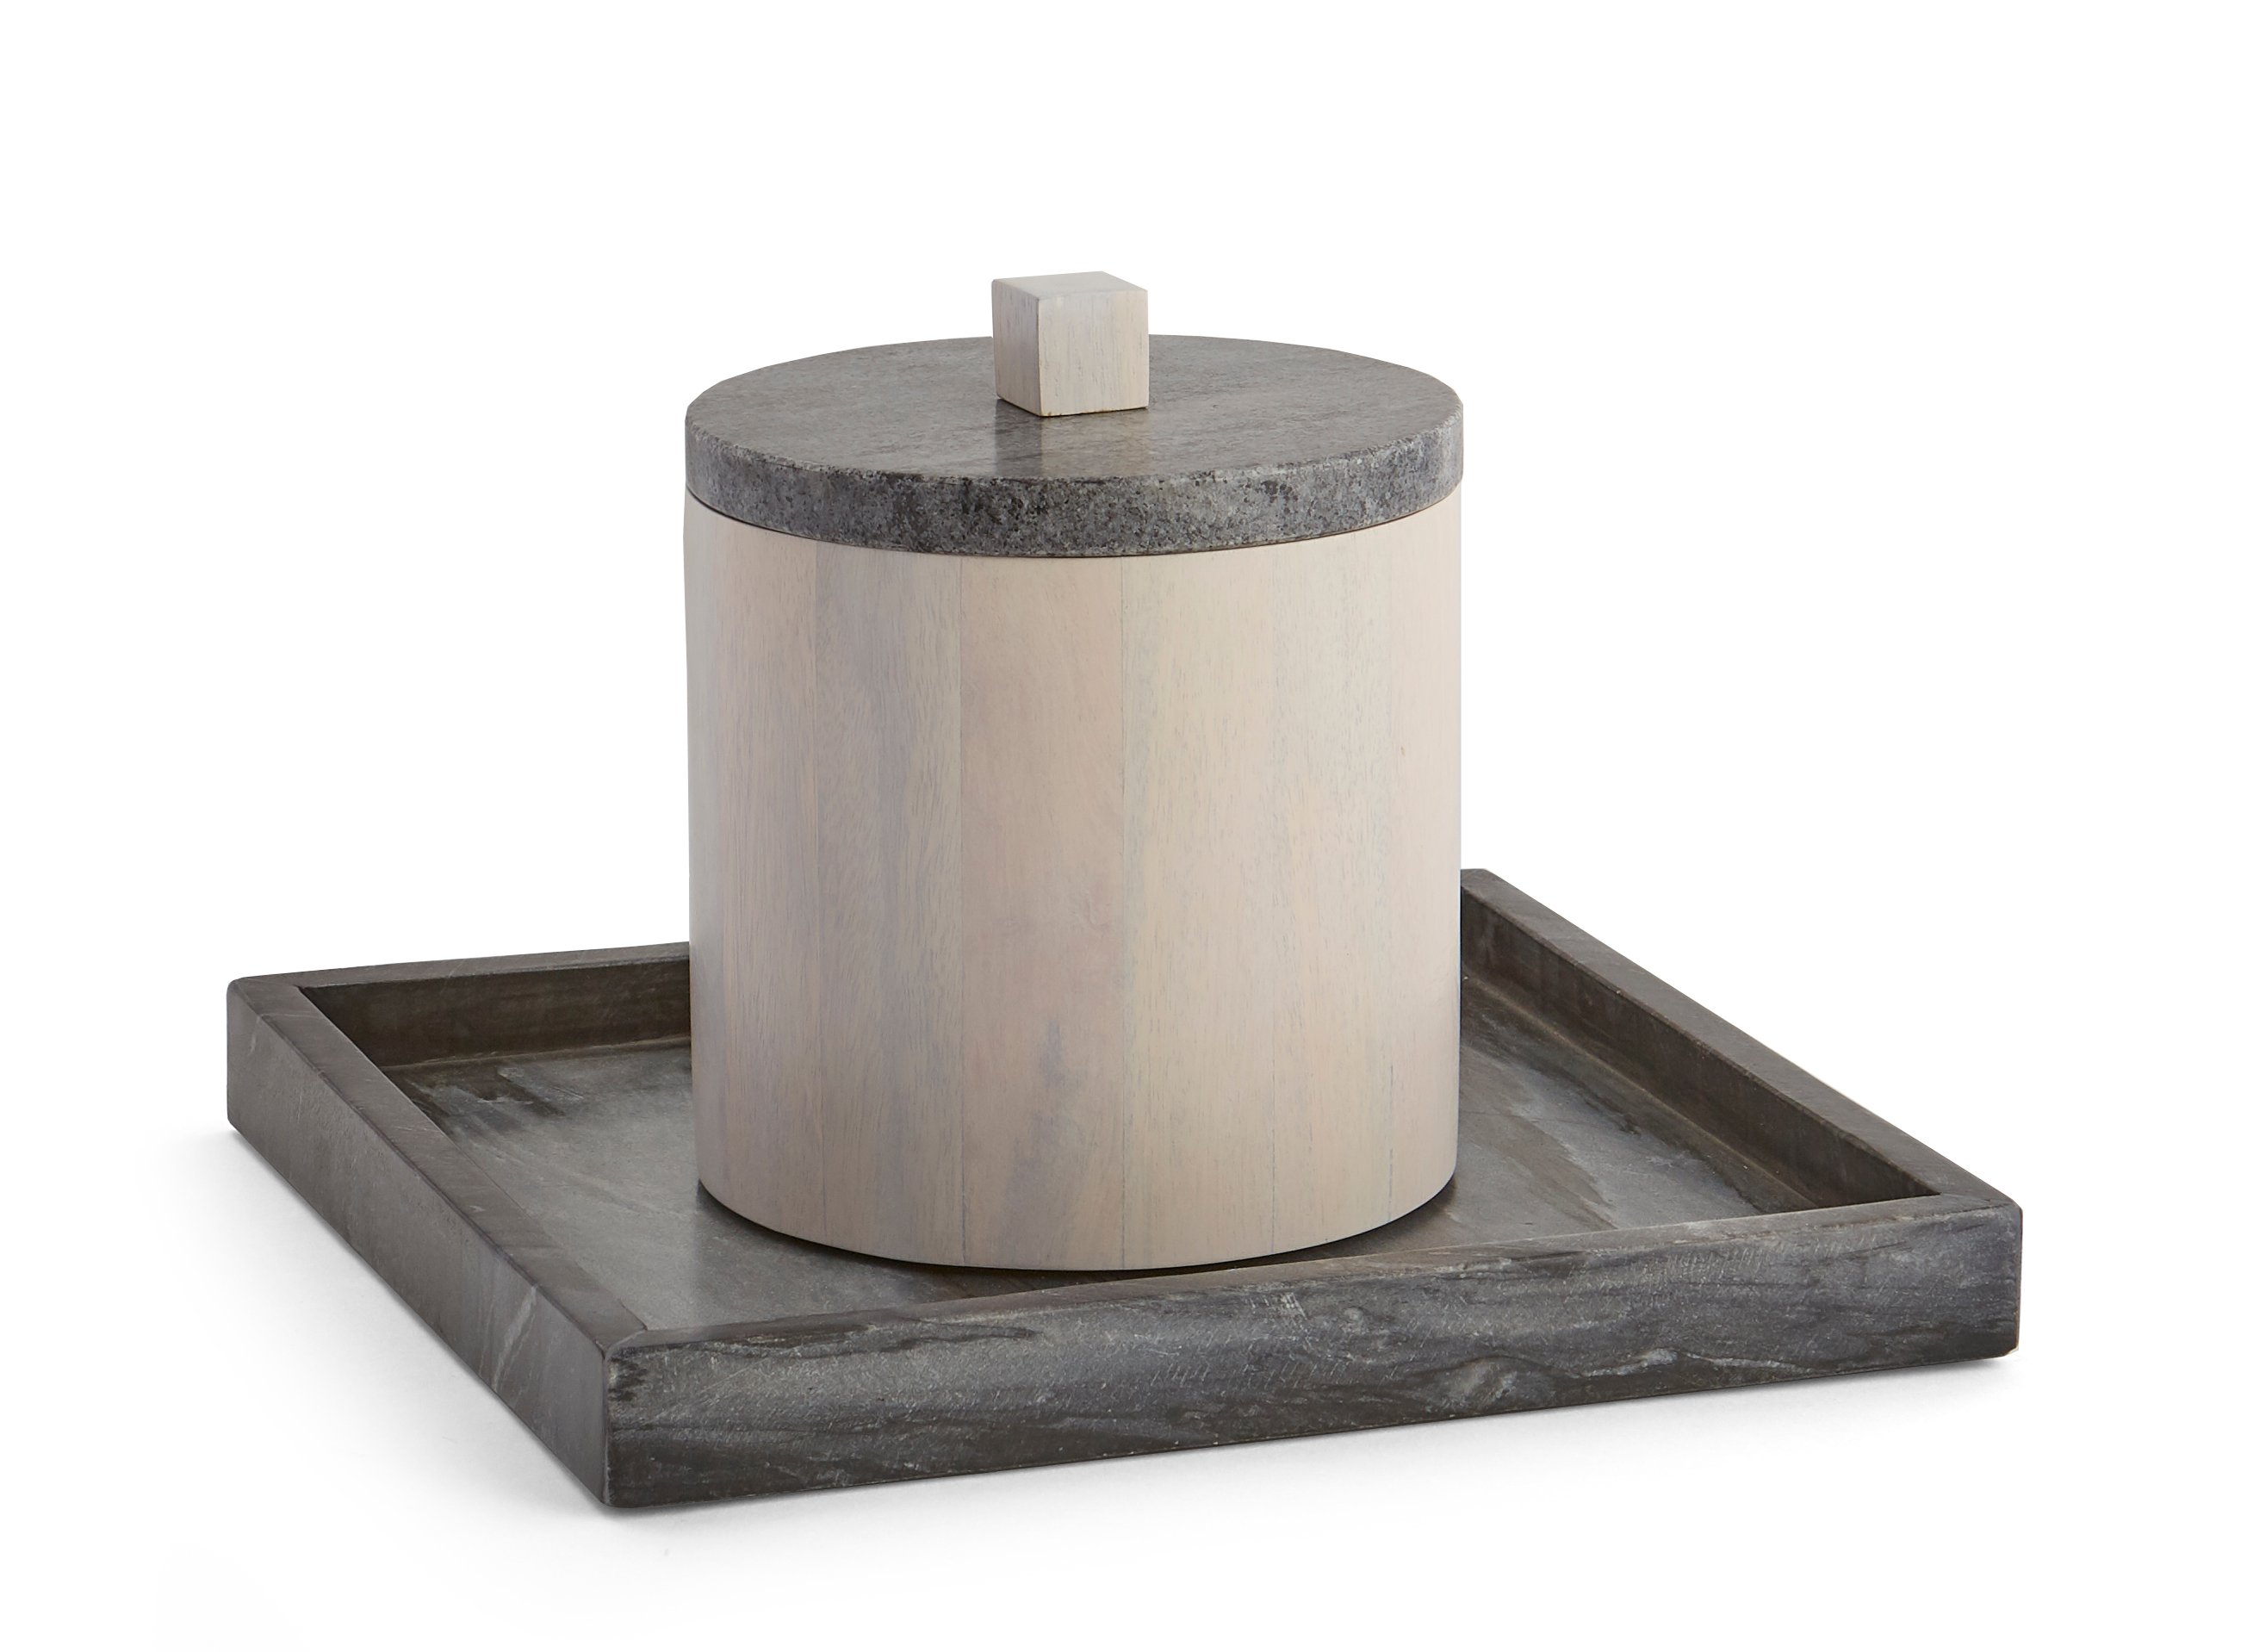 The Barrington Bar collection is available in whitewashed mango wood combined with gray marble